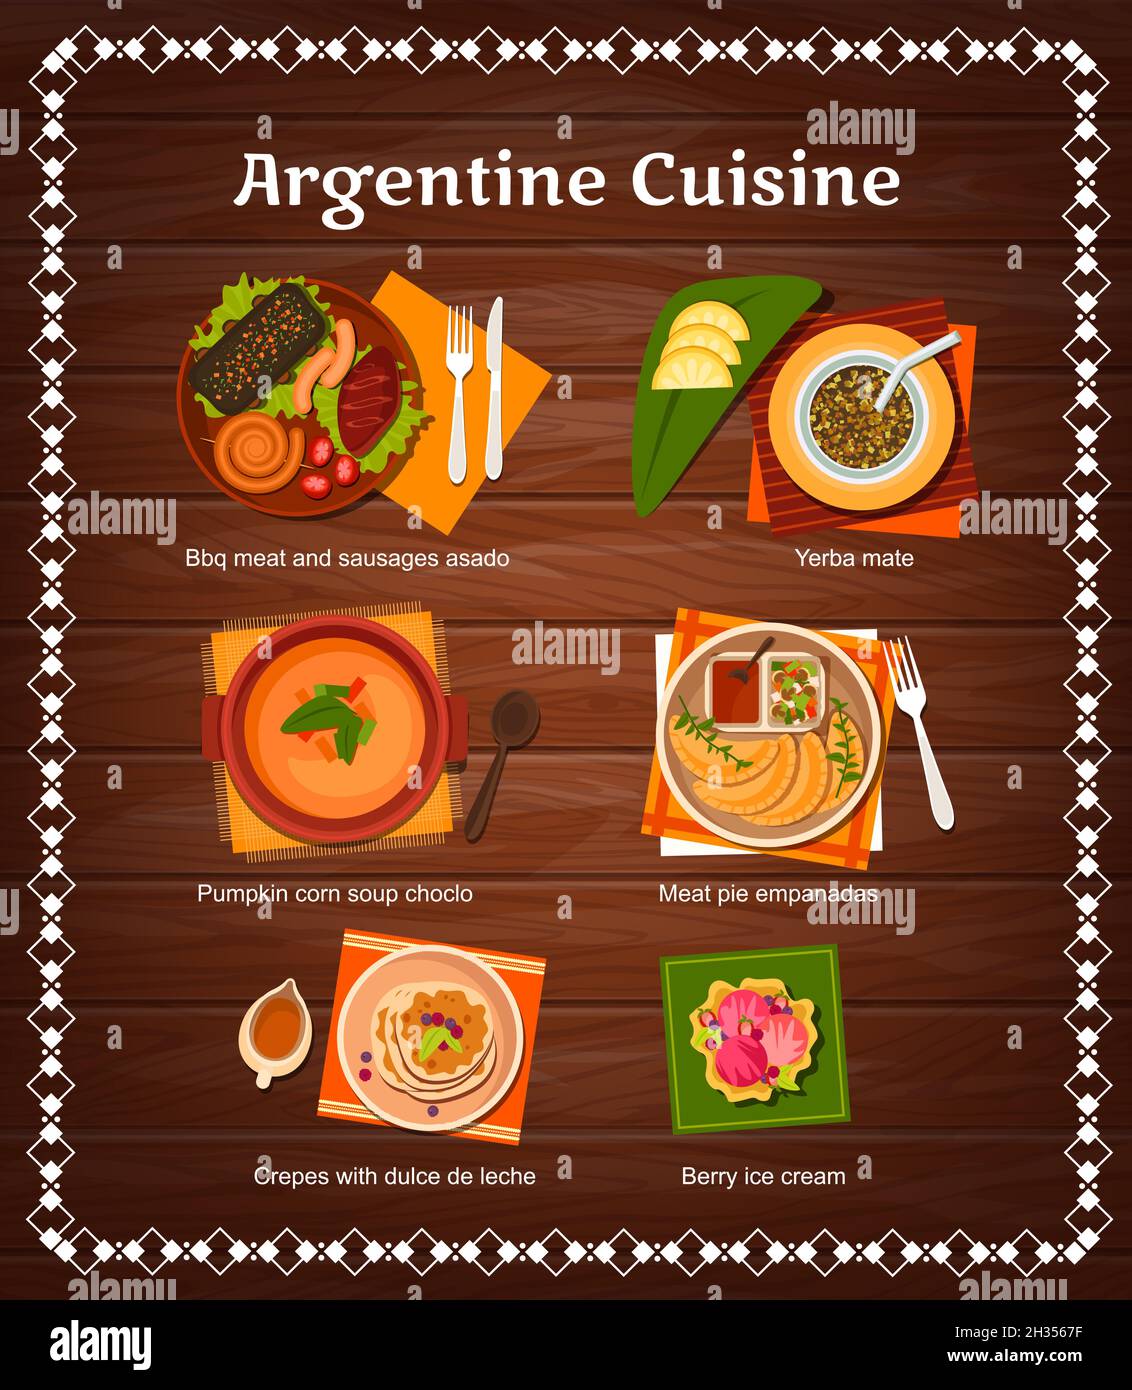 Argentine cuisine restaurant menu with vector dishes of meat and vegetables. Barbecue chorizo sausages, pork pies empanadas and chimichurri sauce, cor Stock Vector